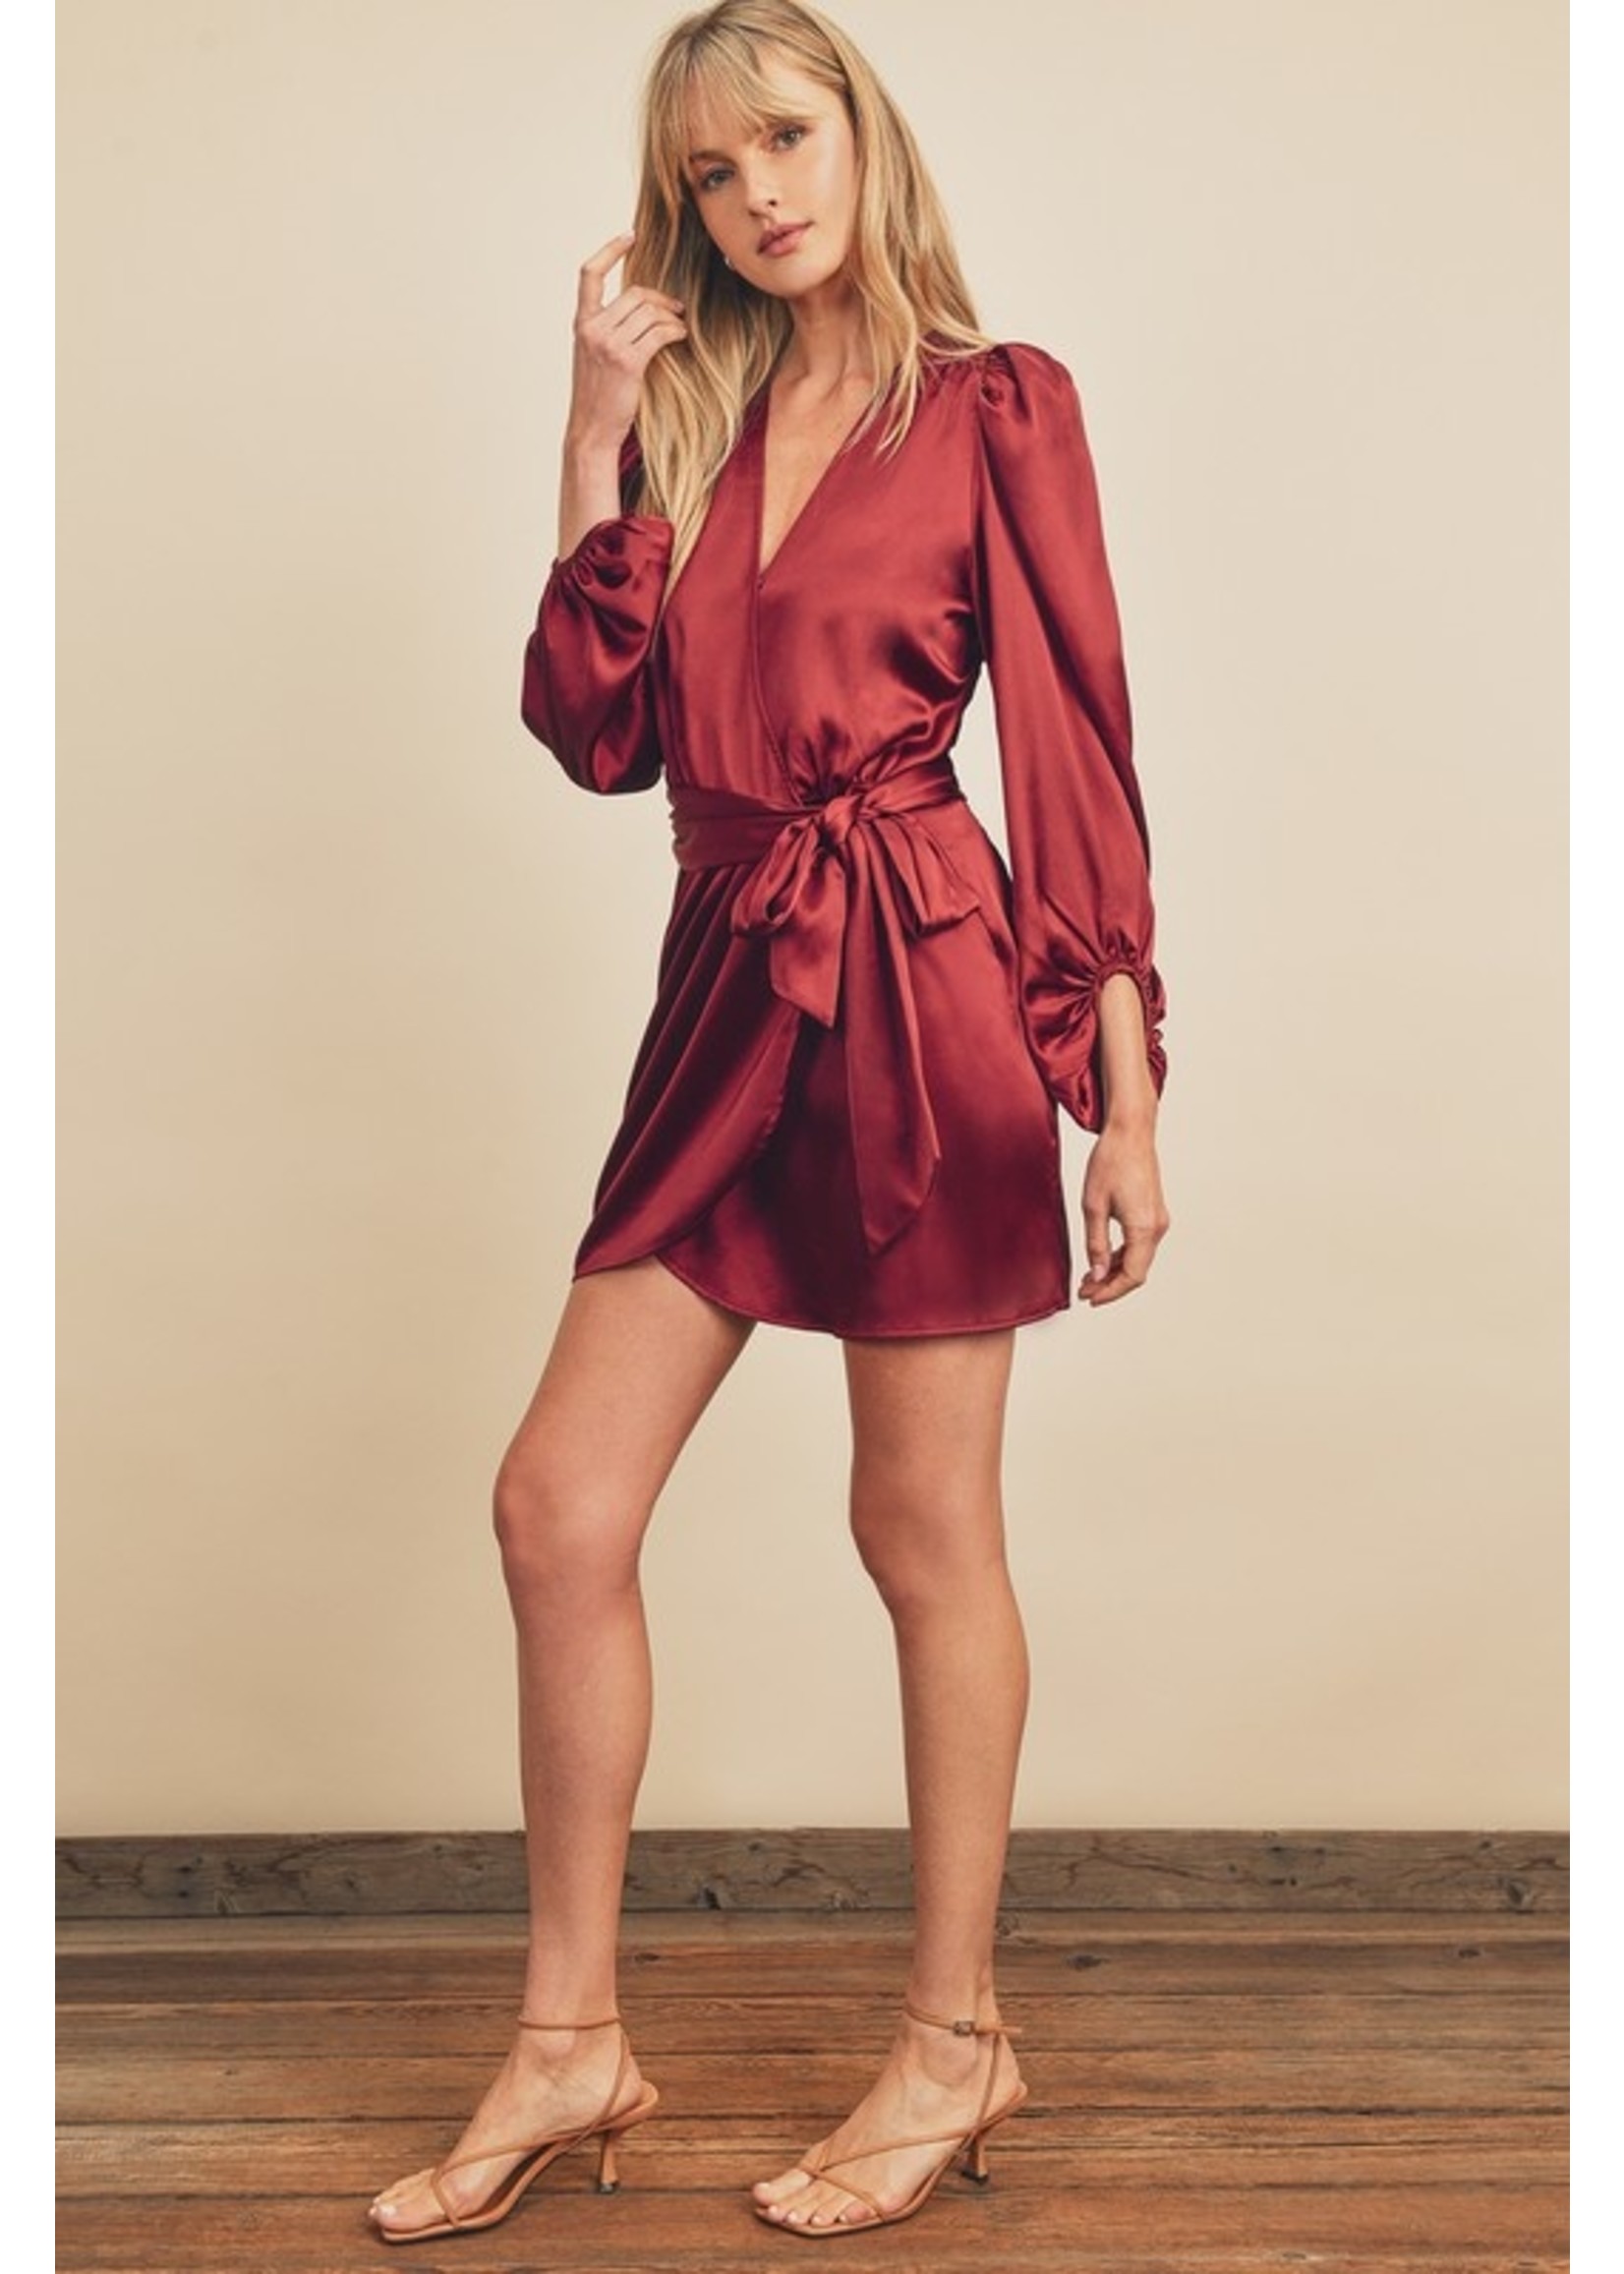 The A Grand Party Satin Wrap Dress